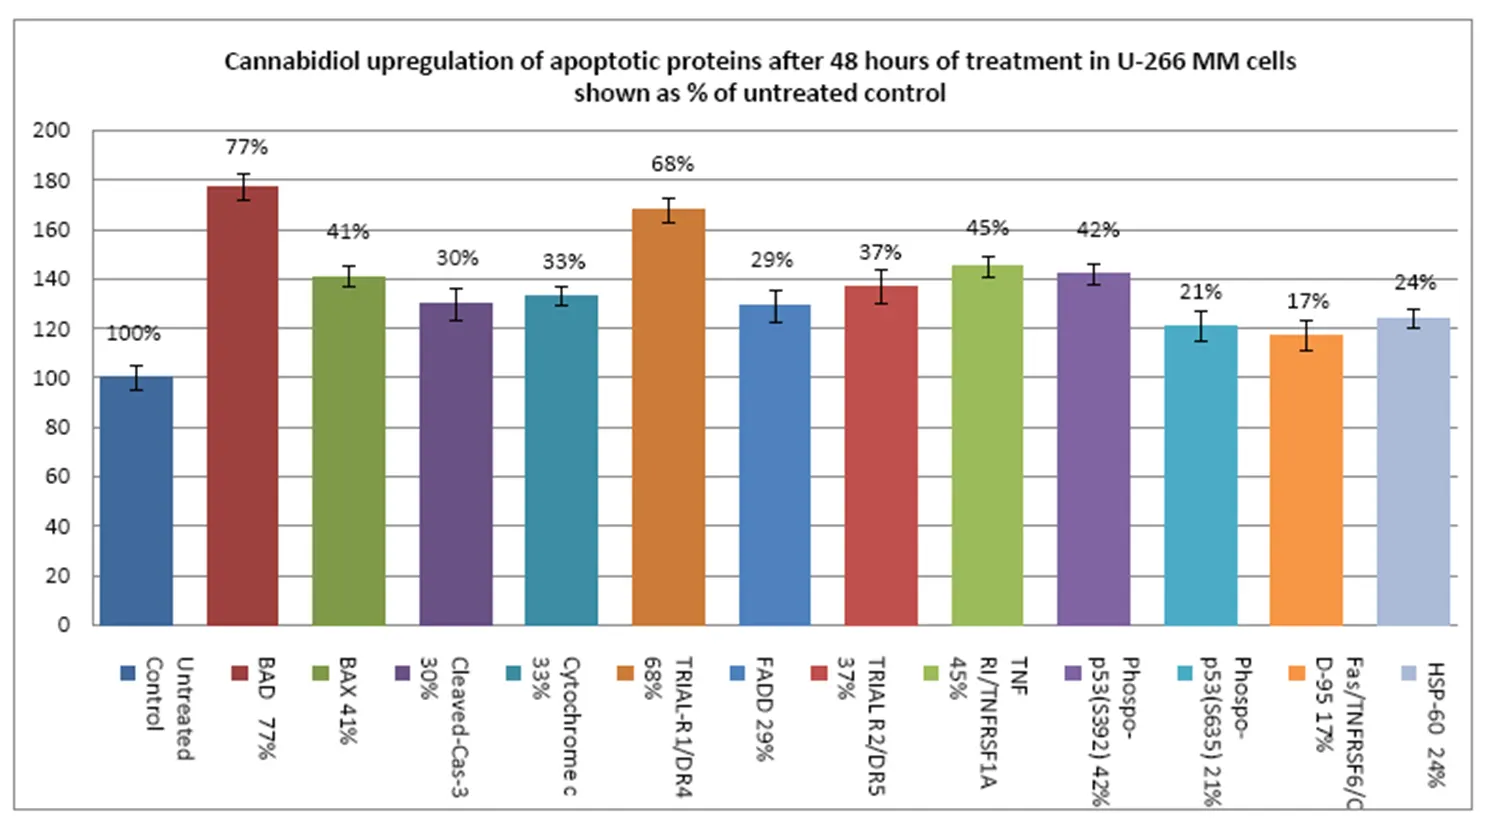 Cannabidiol upregulation of apoptotic proteins after 48 hours of treatment in U-266 MM cells shown as % of untreated control